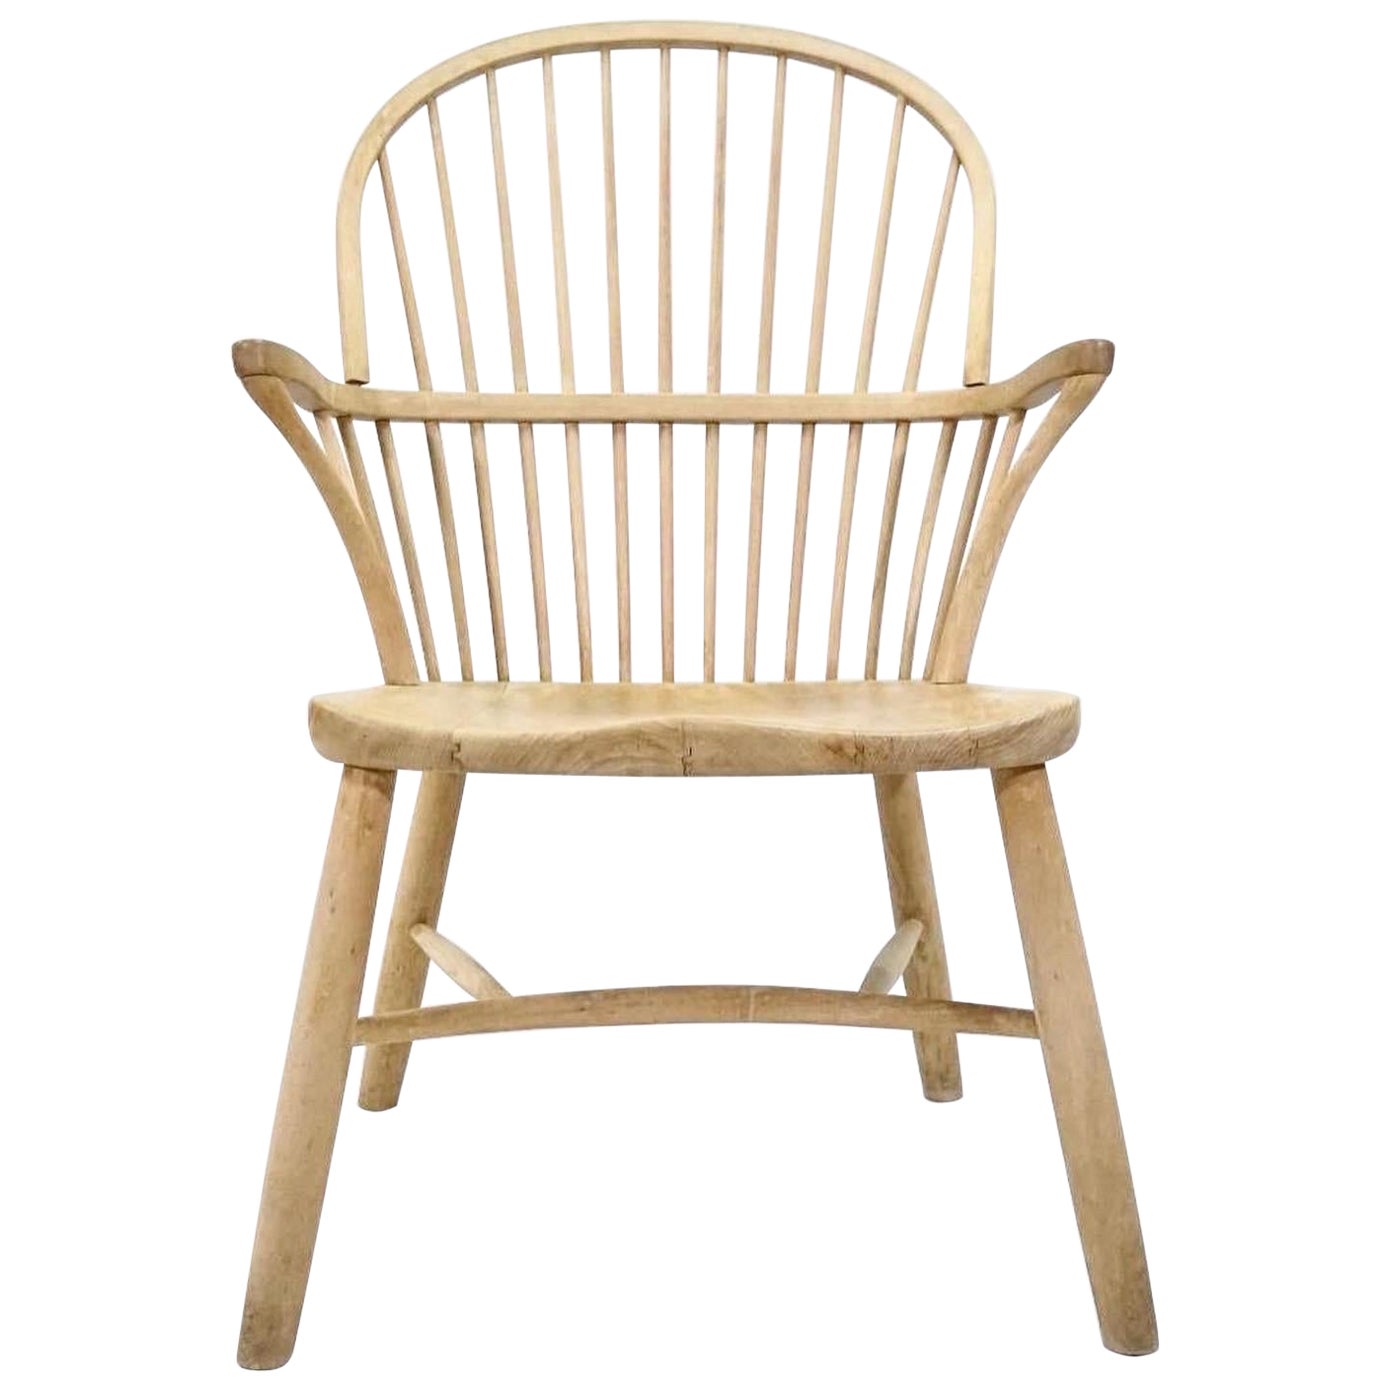 Palle Suenson Windsor Chair in Solid Beech Wood Produced by Fritz Hansen